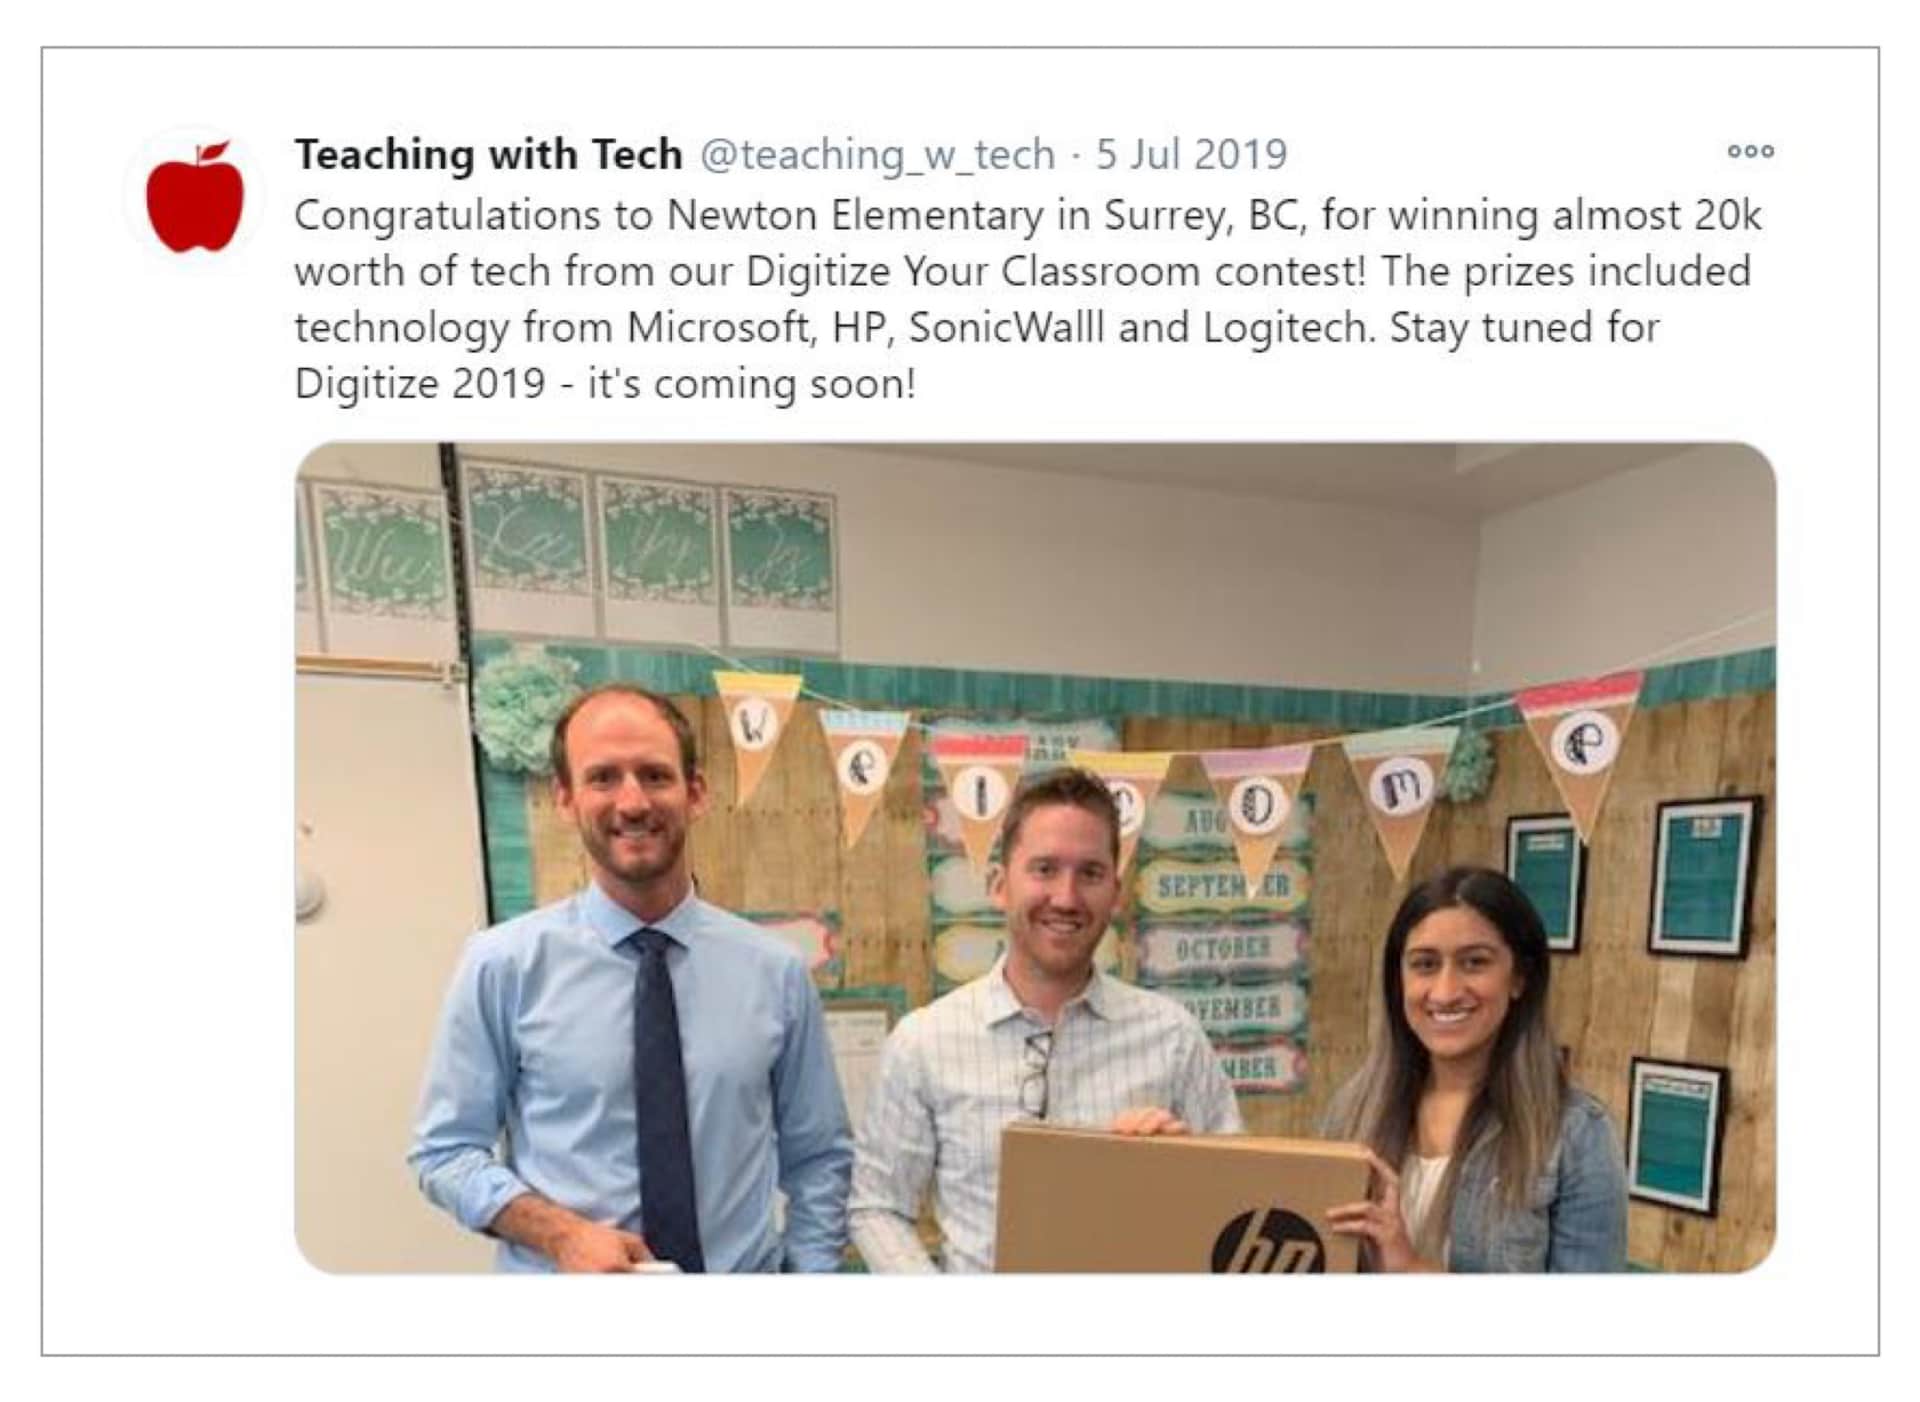 Digitize Your Classroom Winners 2018